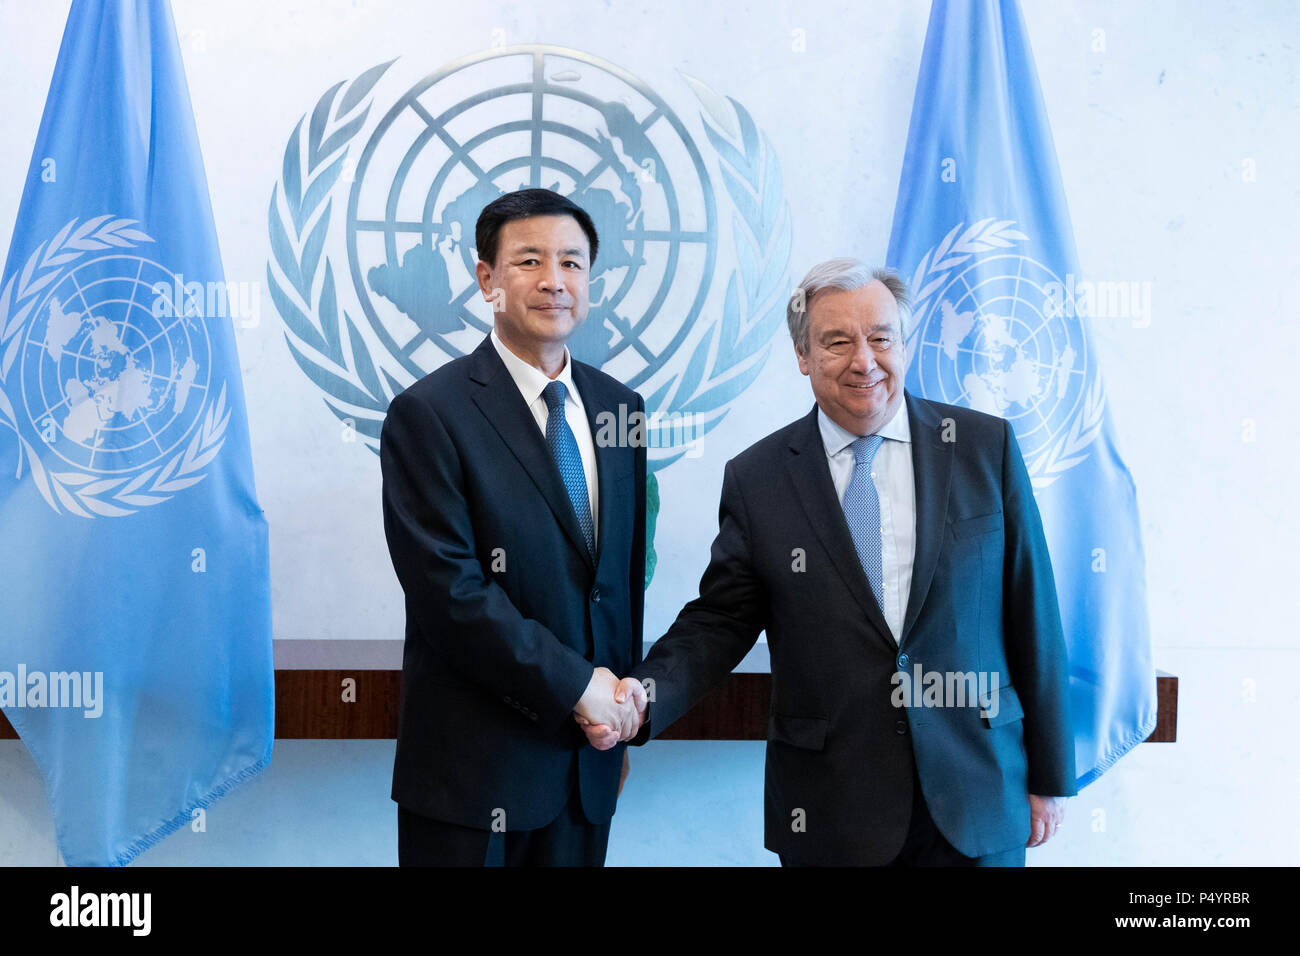 United Nations. 22nd June, 2018. United Nations Secretary-General Antonio Guterres (R) meets with Chinese Deputy Public Security Minister Wang Xiaohong at the UN headquarters in New York June 22, 2018. Antonio Guterres on Friday commended China's contributions to the UN peacekeeping mission. Credit: Li Muzi/Xinhua/Alamy Live News Stock Photo